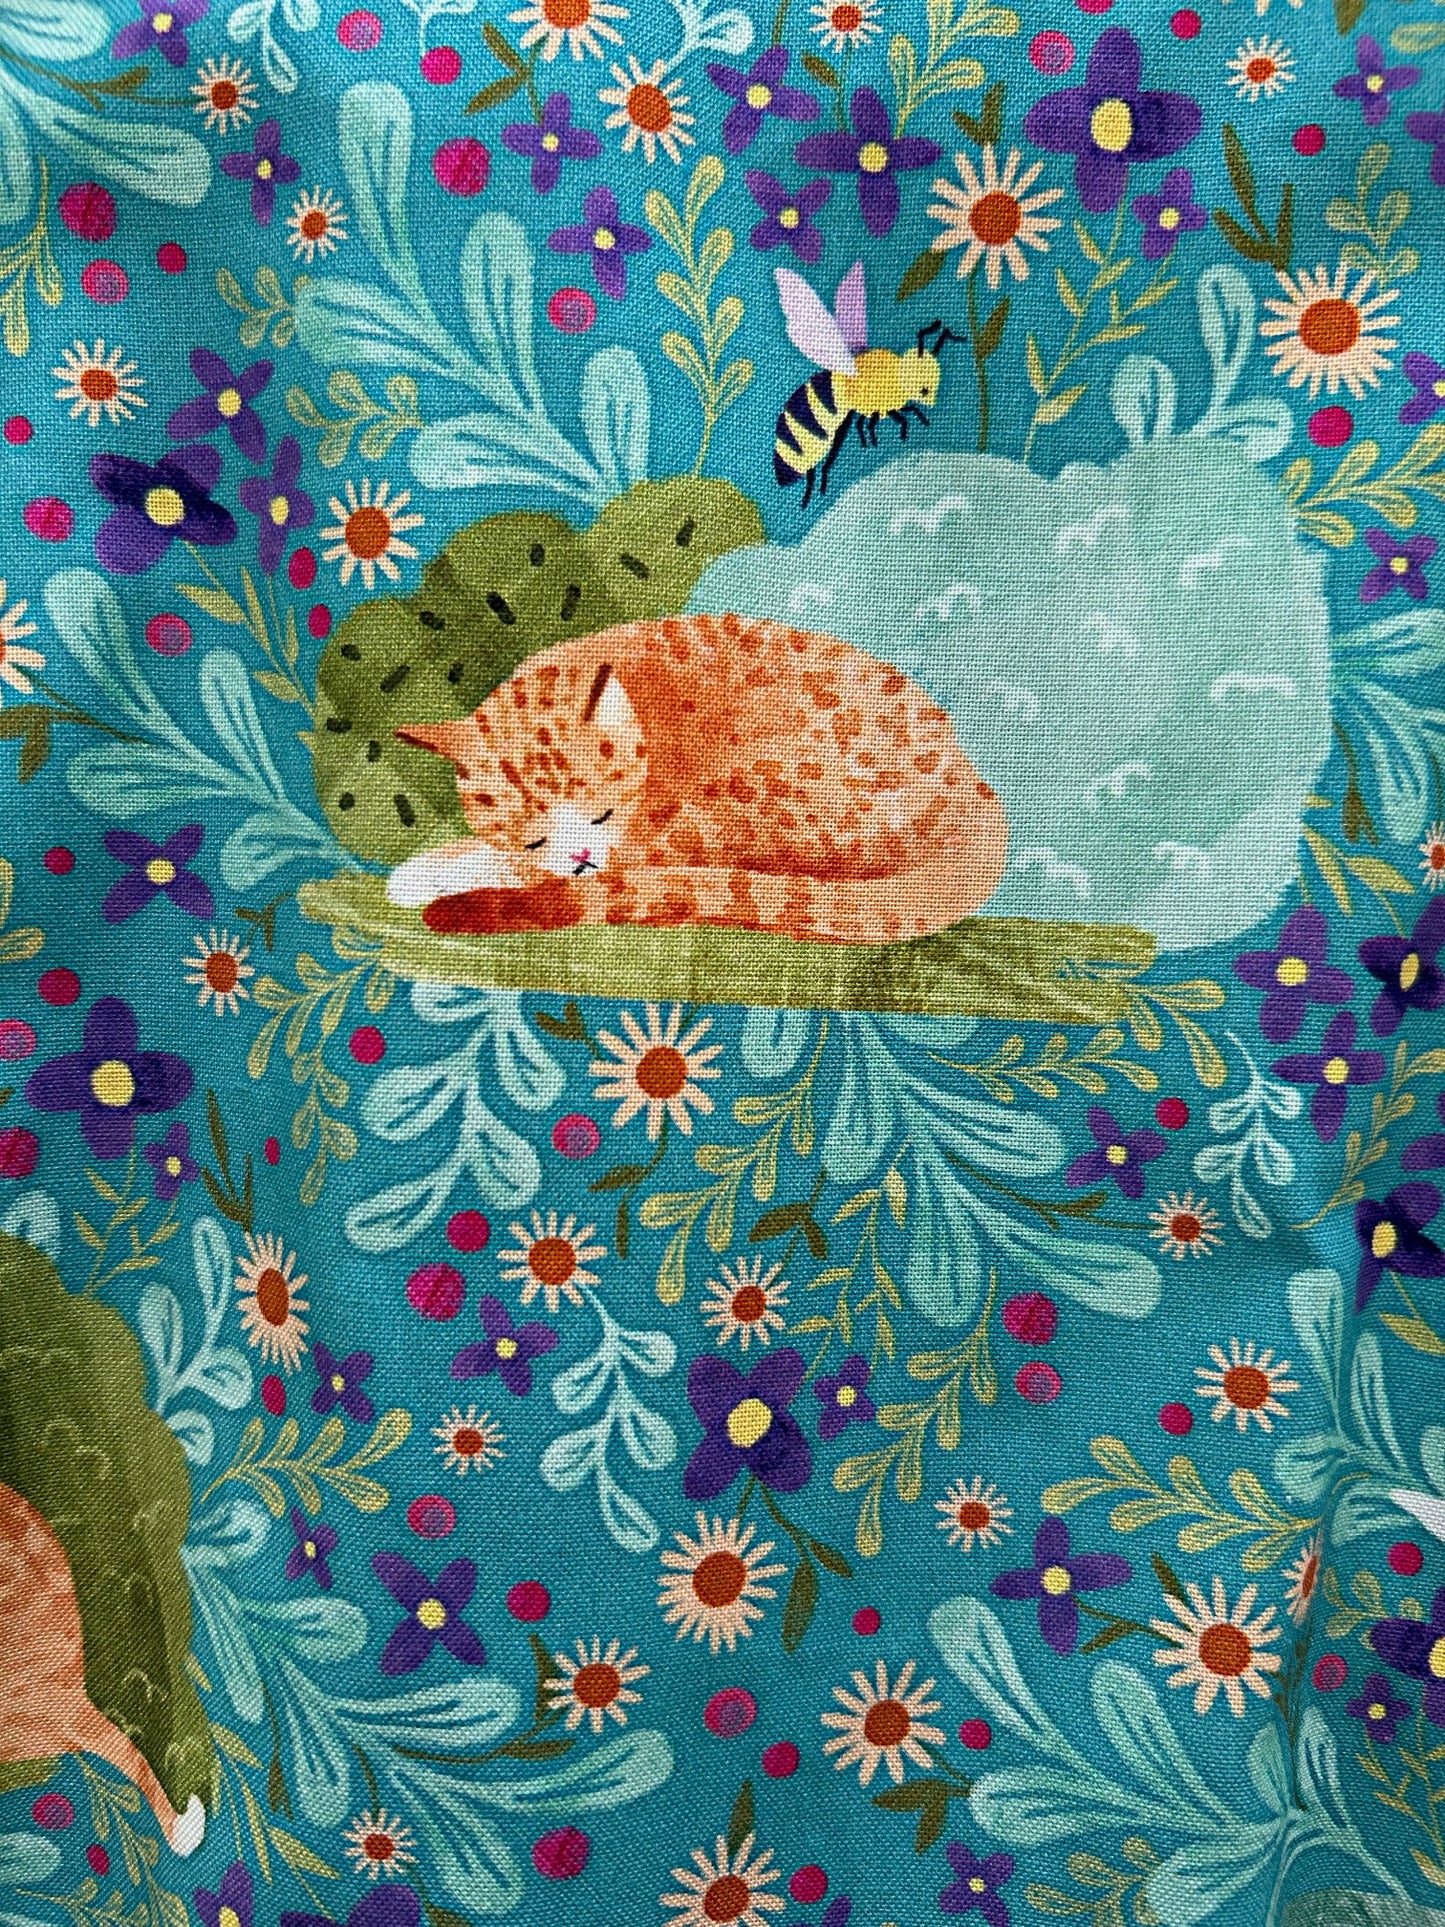 close up of fabric print showing a cat and the floral background